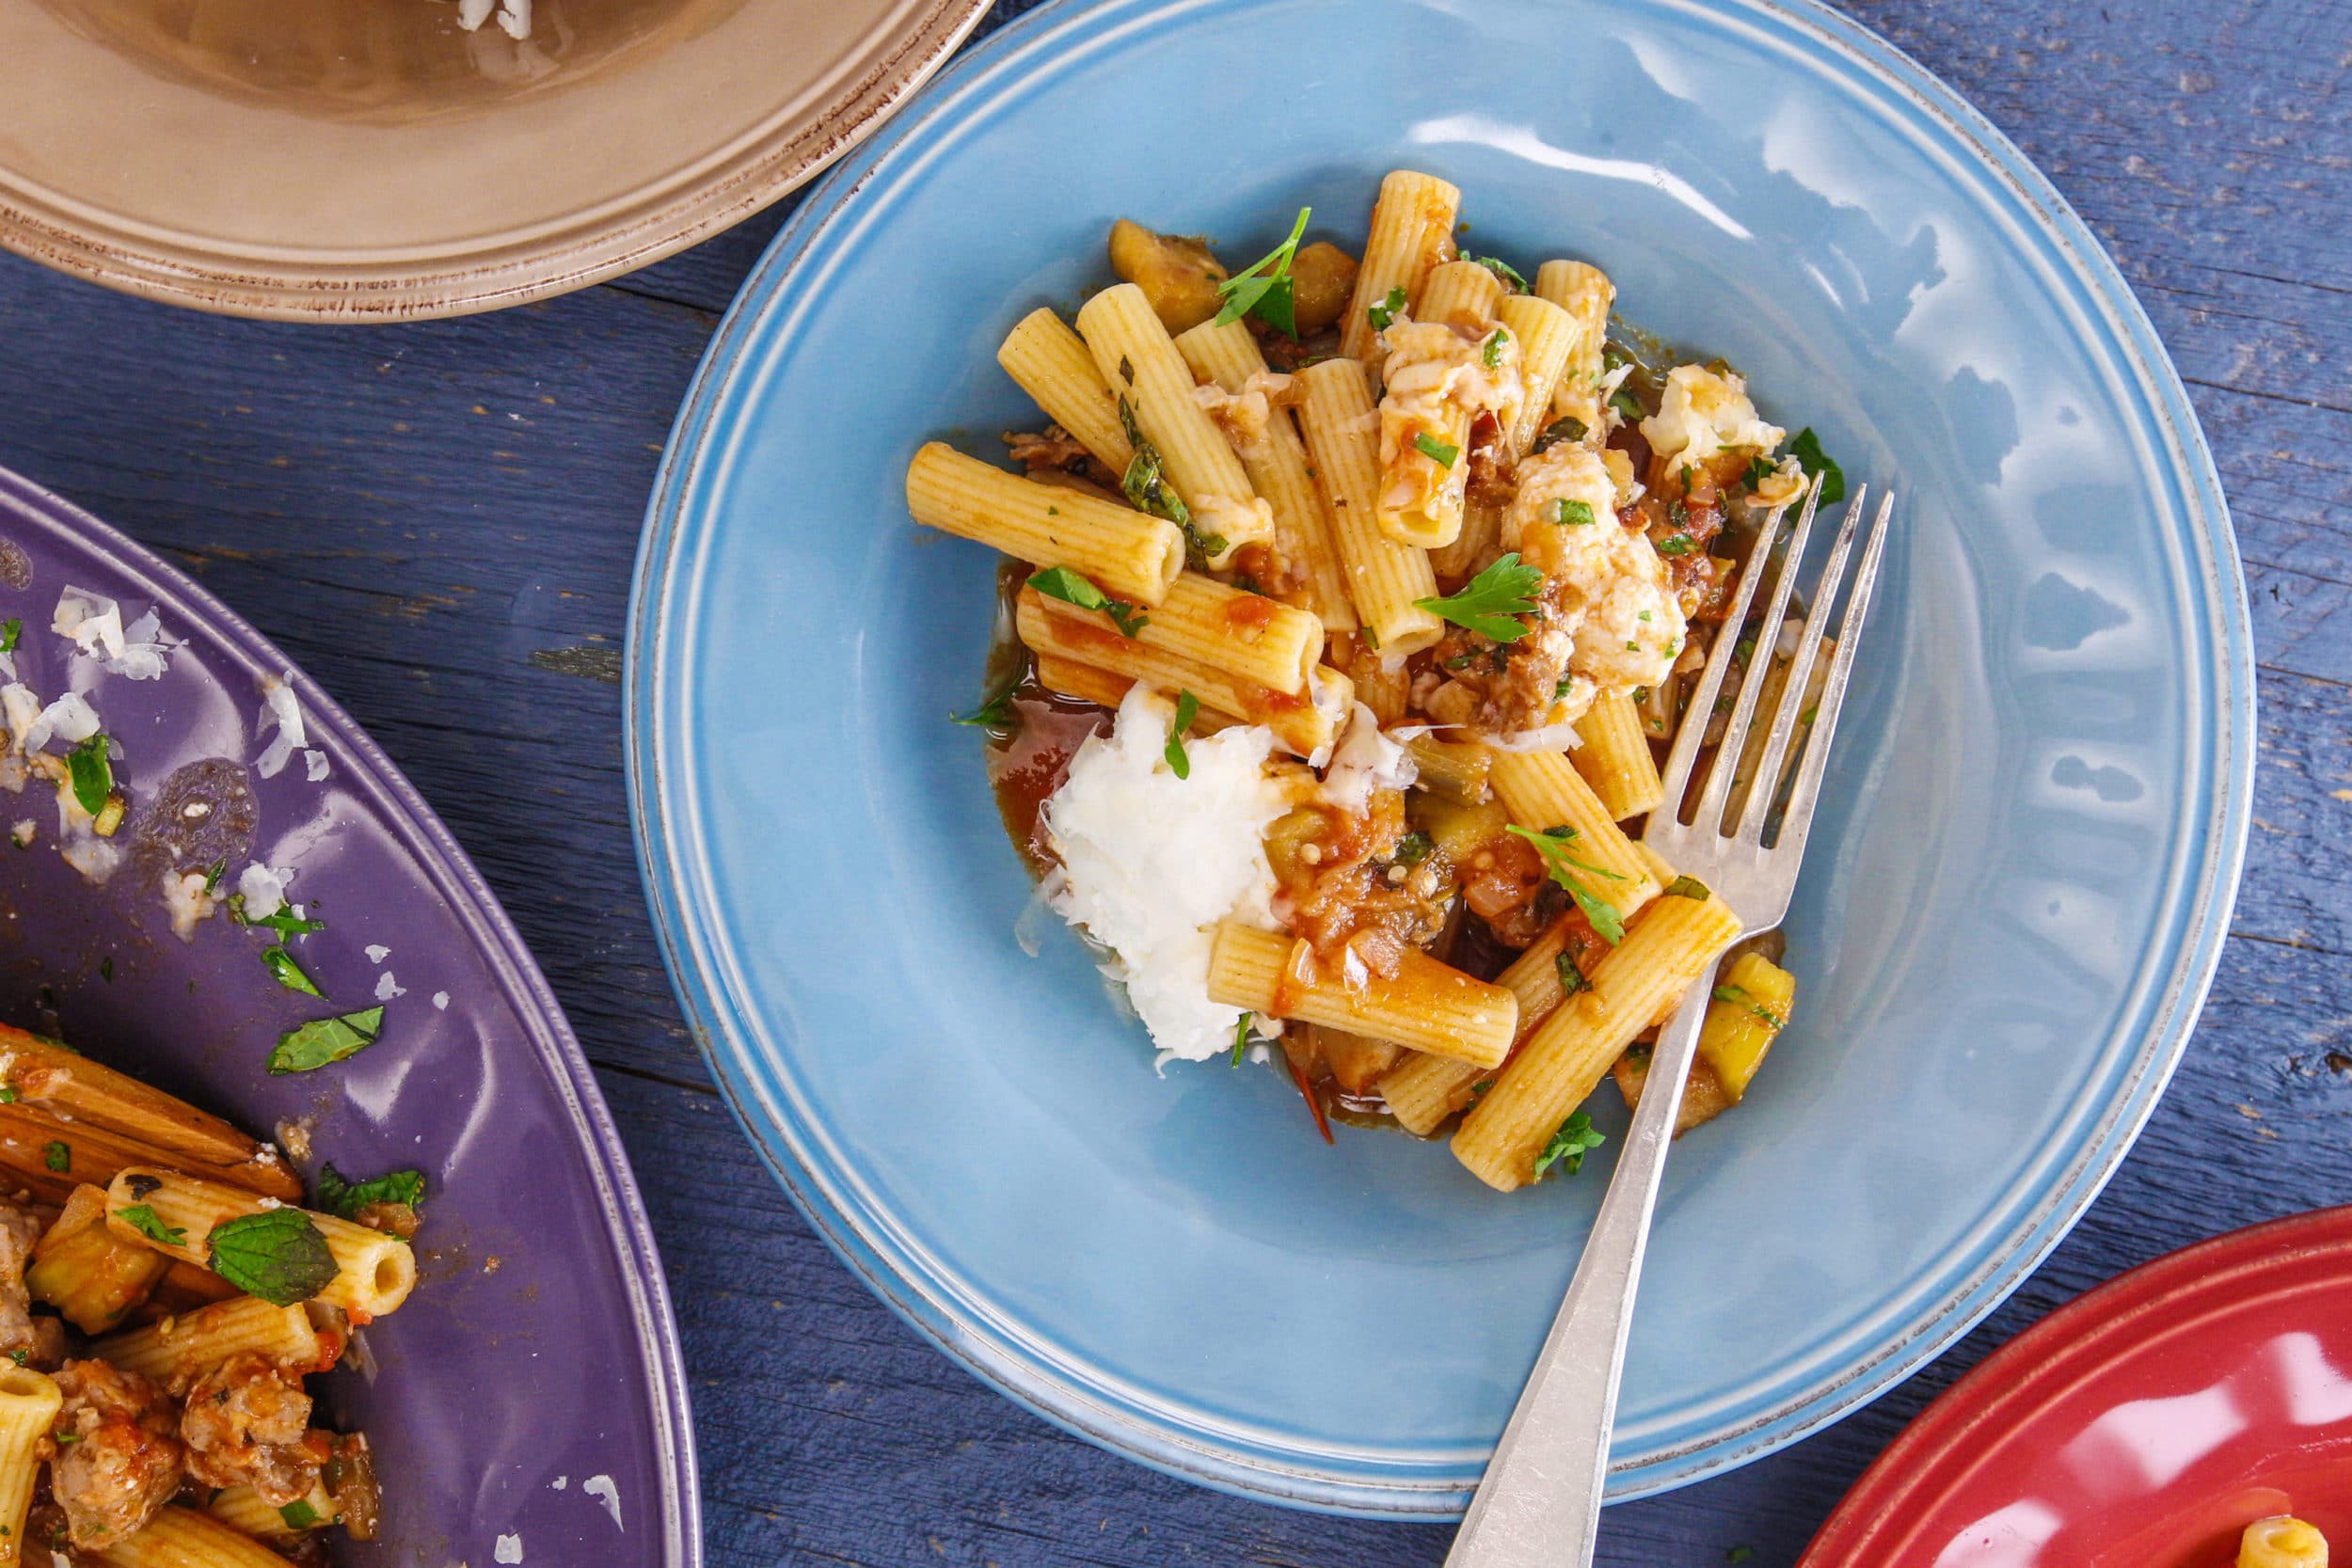 Rachael's Ziti and Sweet-but-Hot Sauce with Sausage and Eggplant